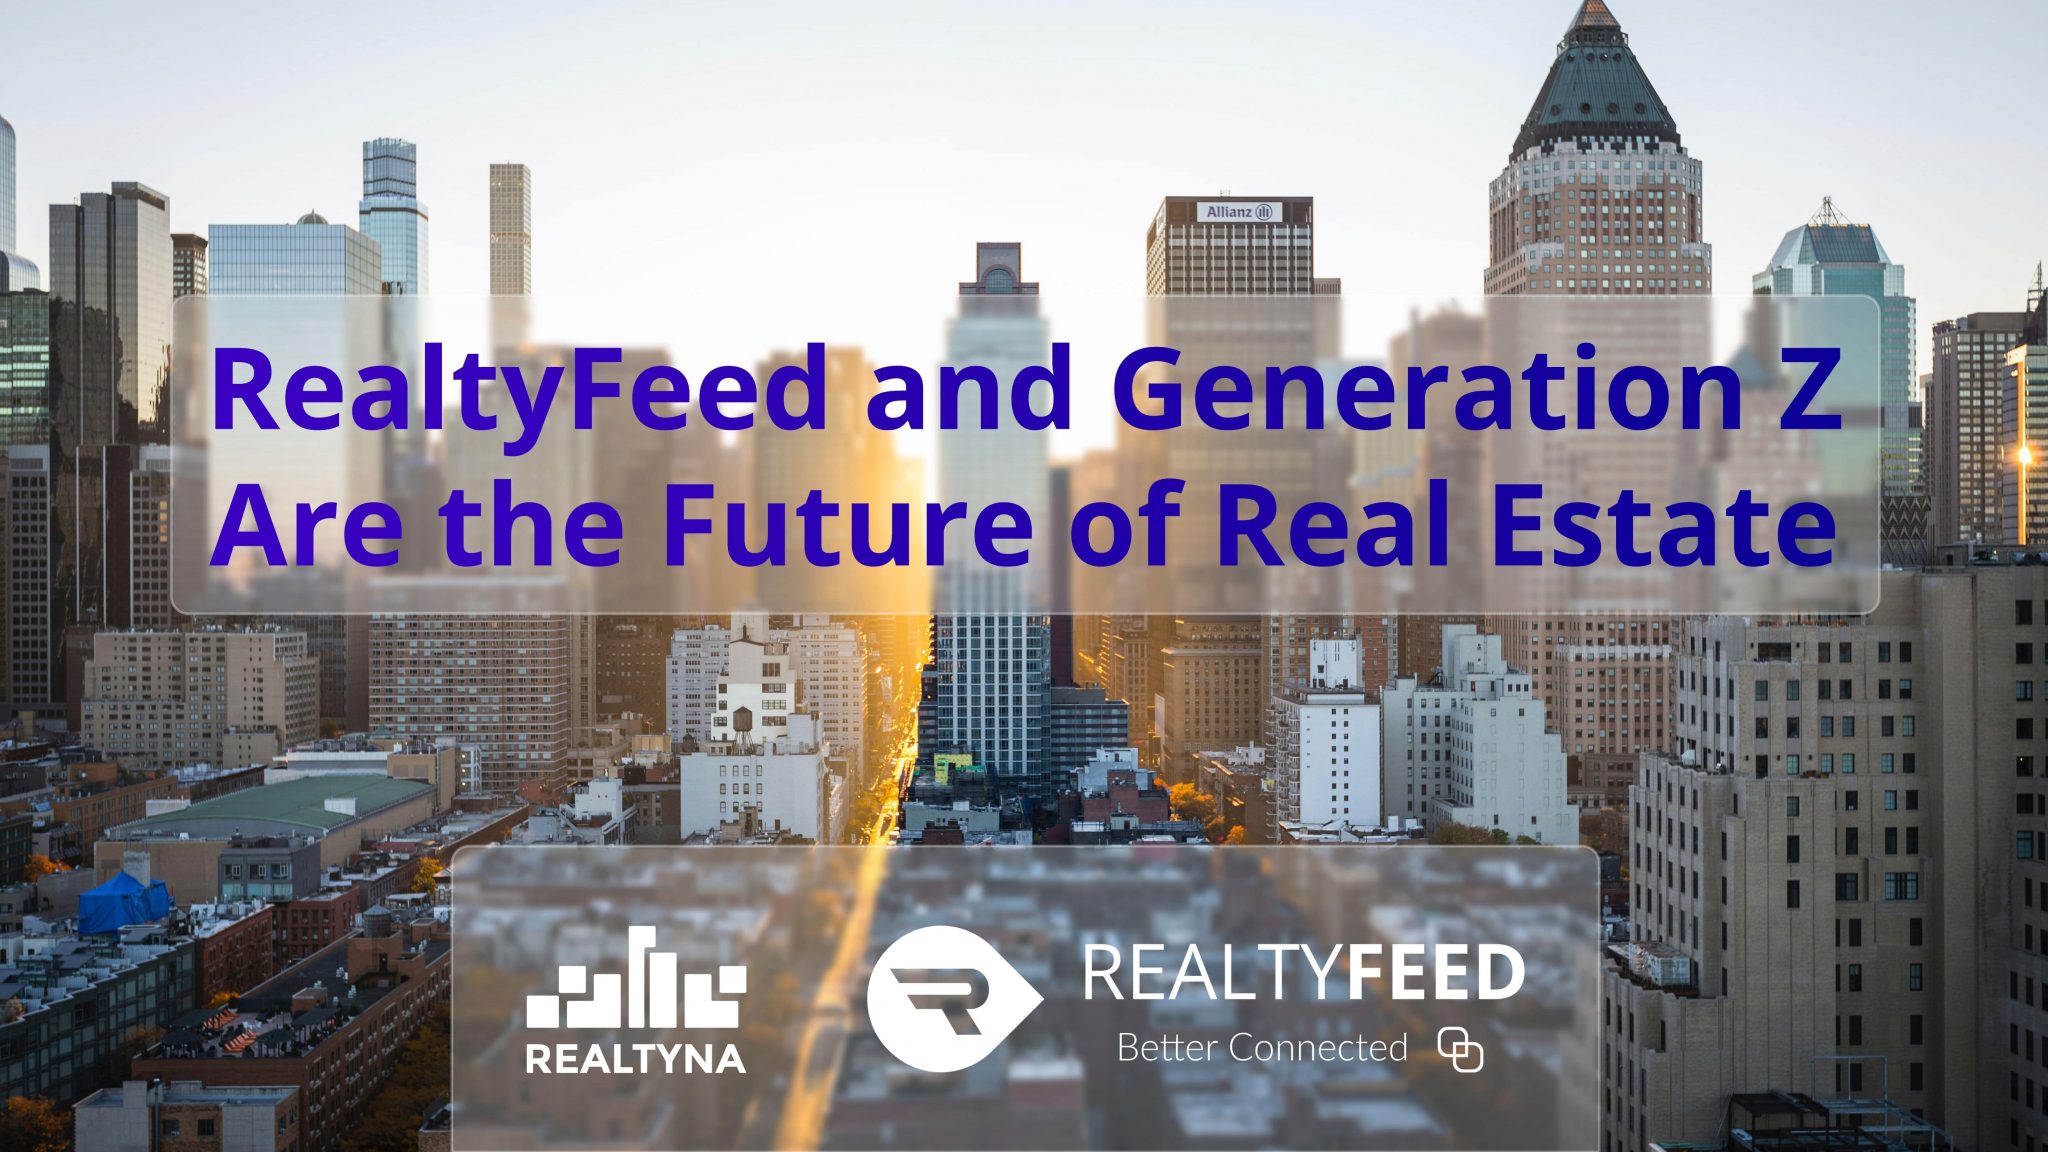 realtyna realtyfeed generation z future real estate 1